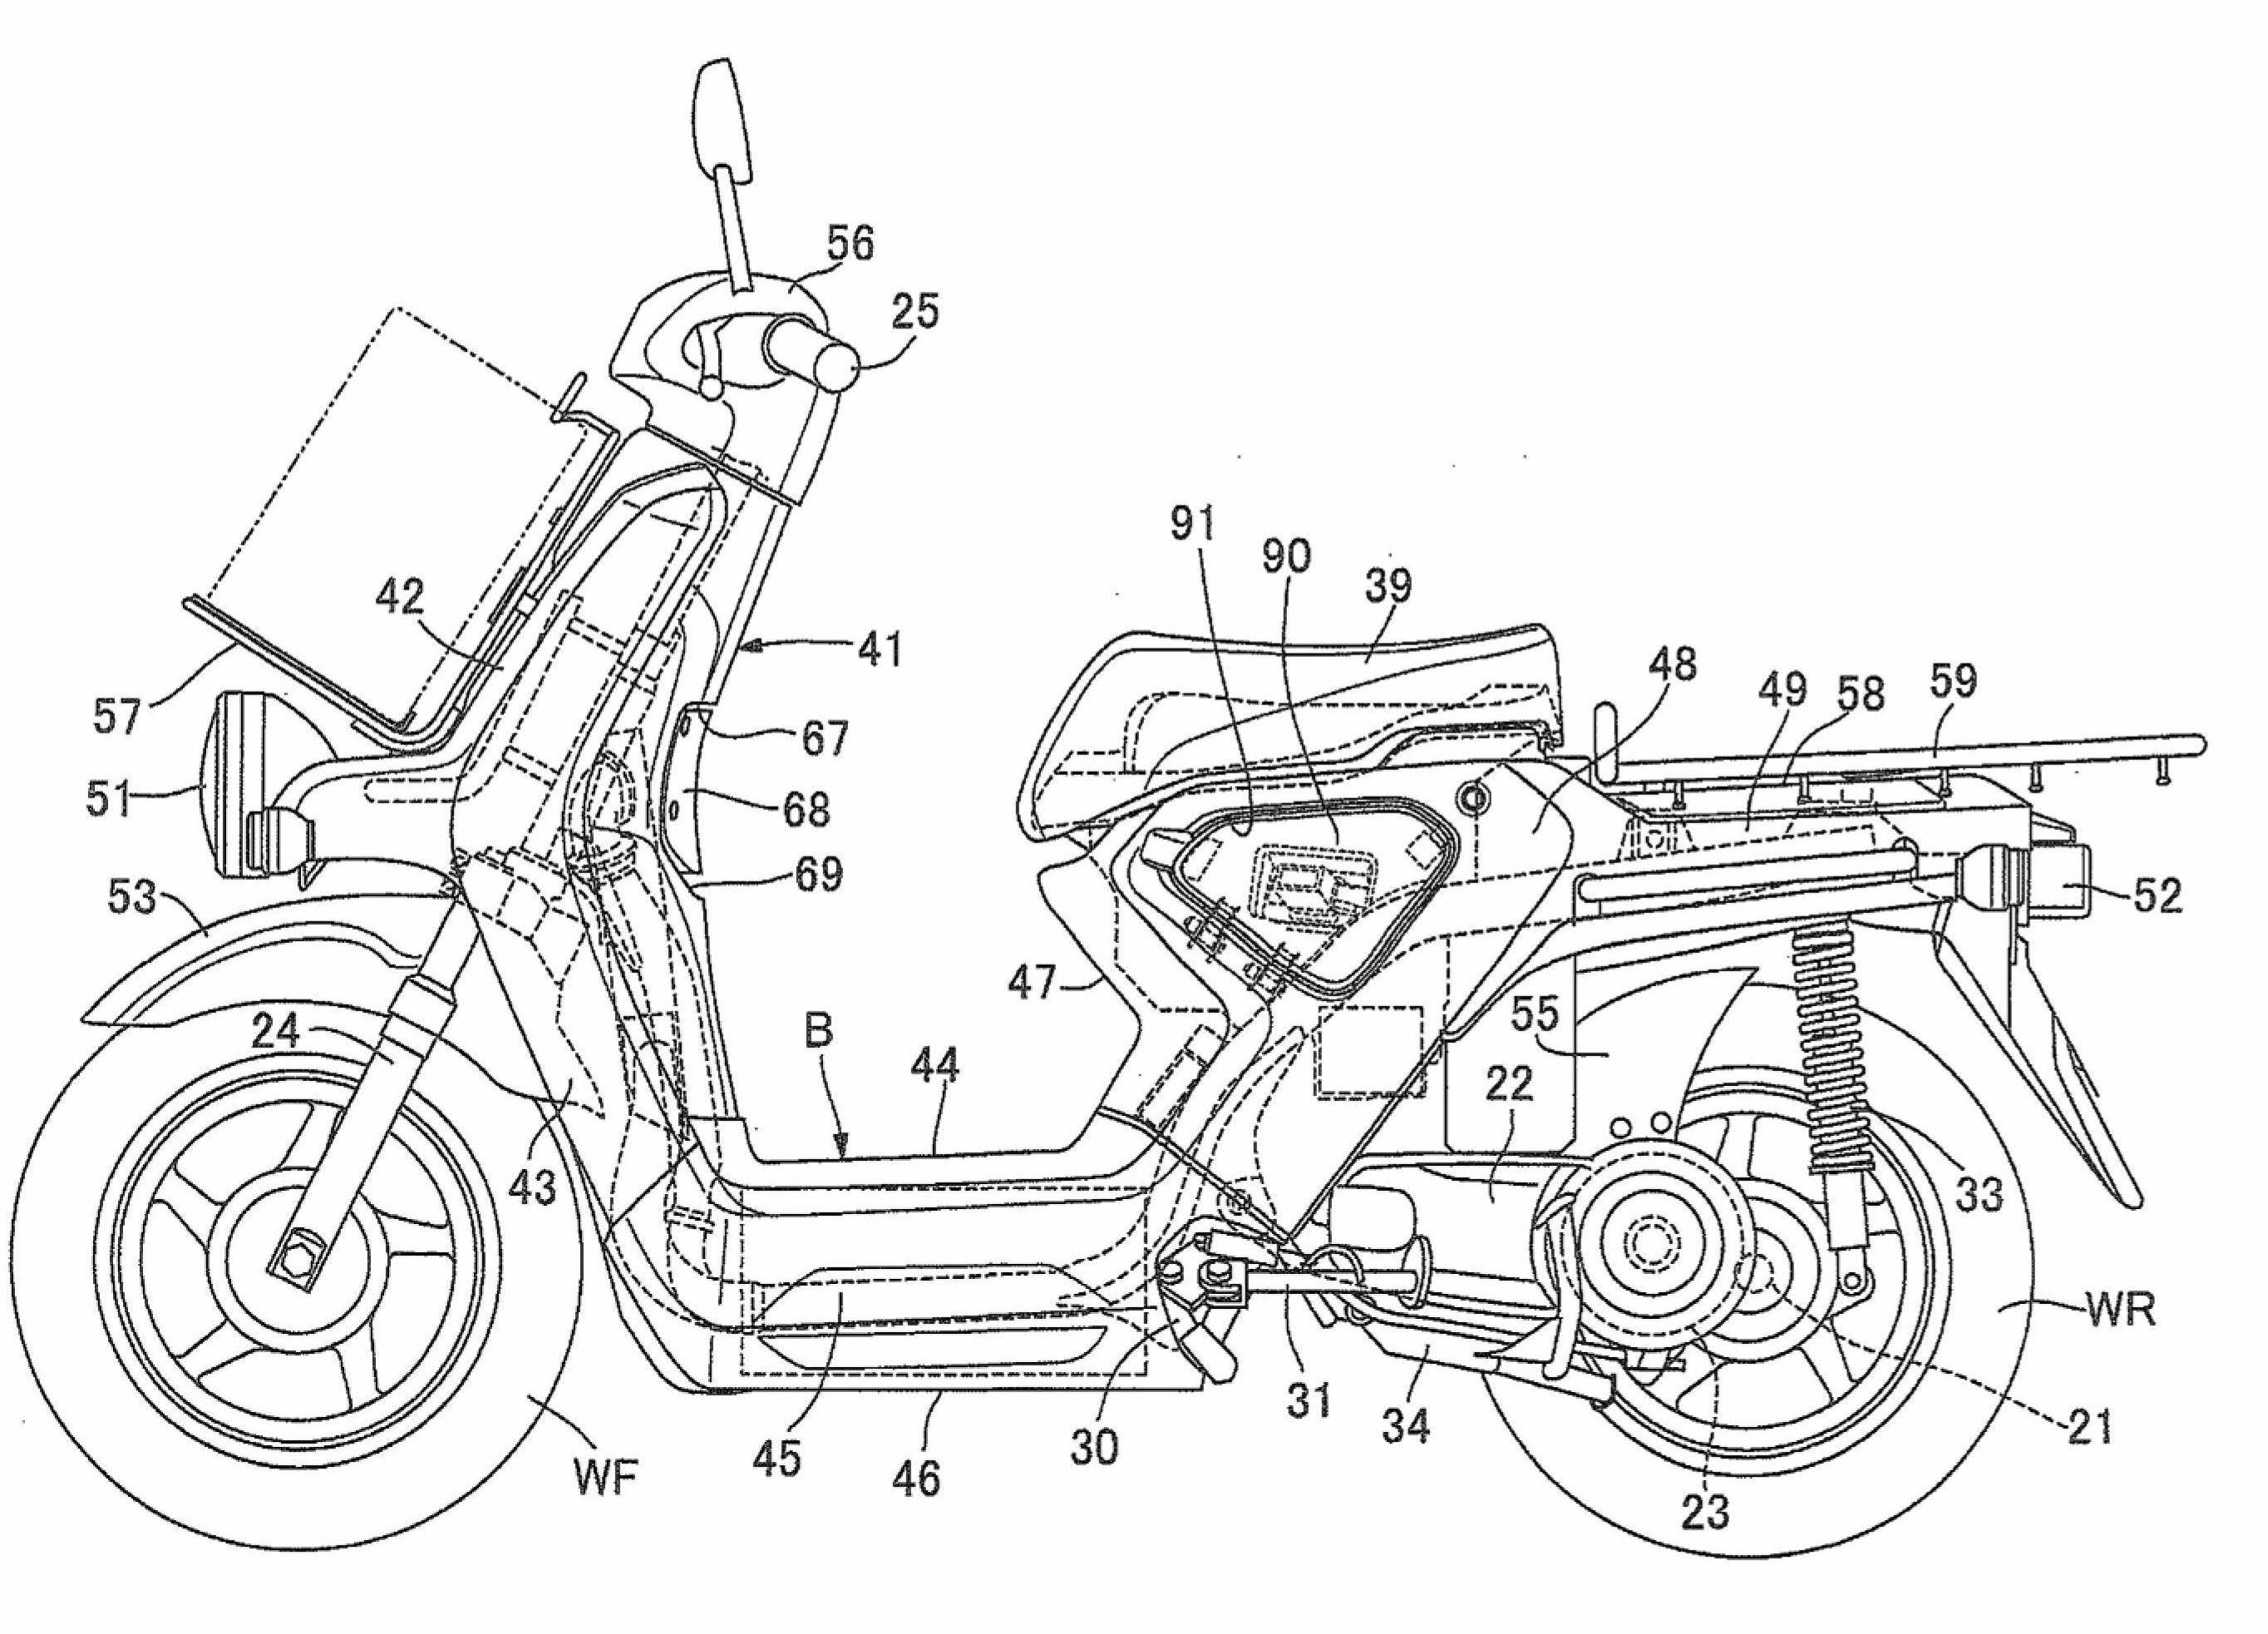 Wiring structure for electrically powered two- or three-wheeled vehicle